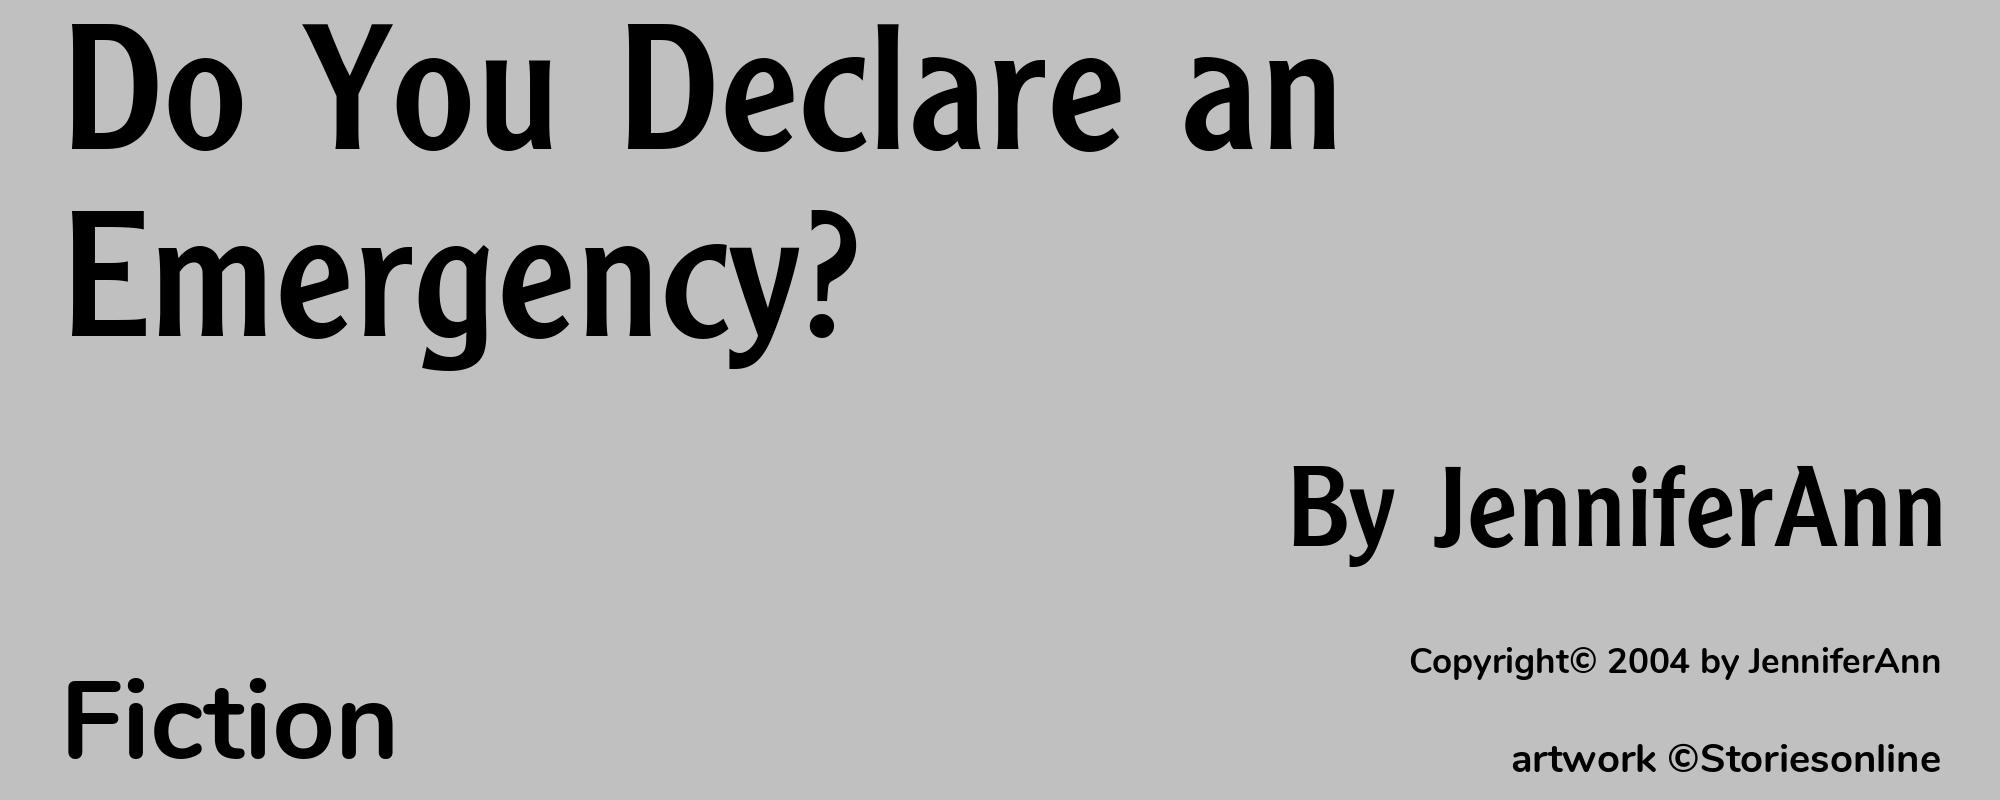 Do You Declare an Emergency? - Cover